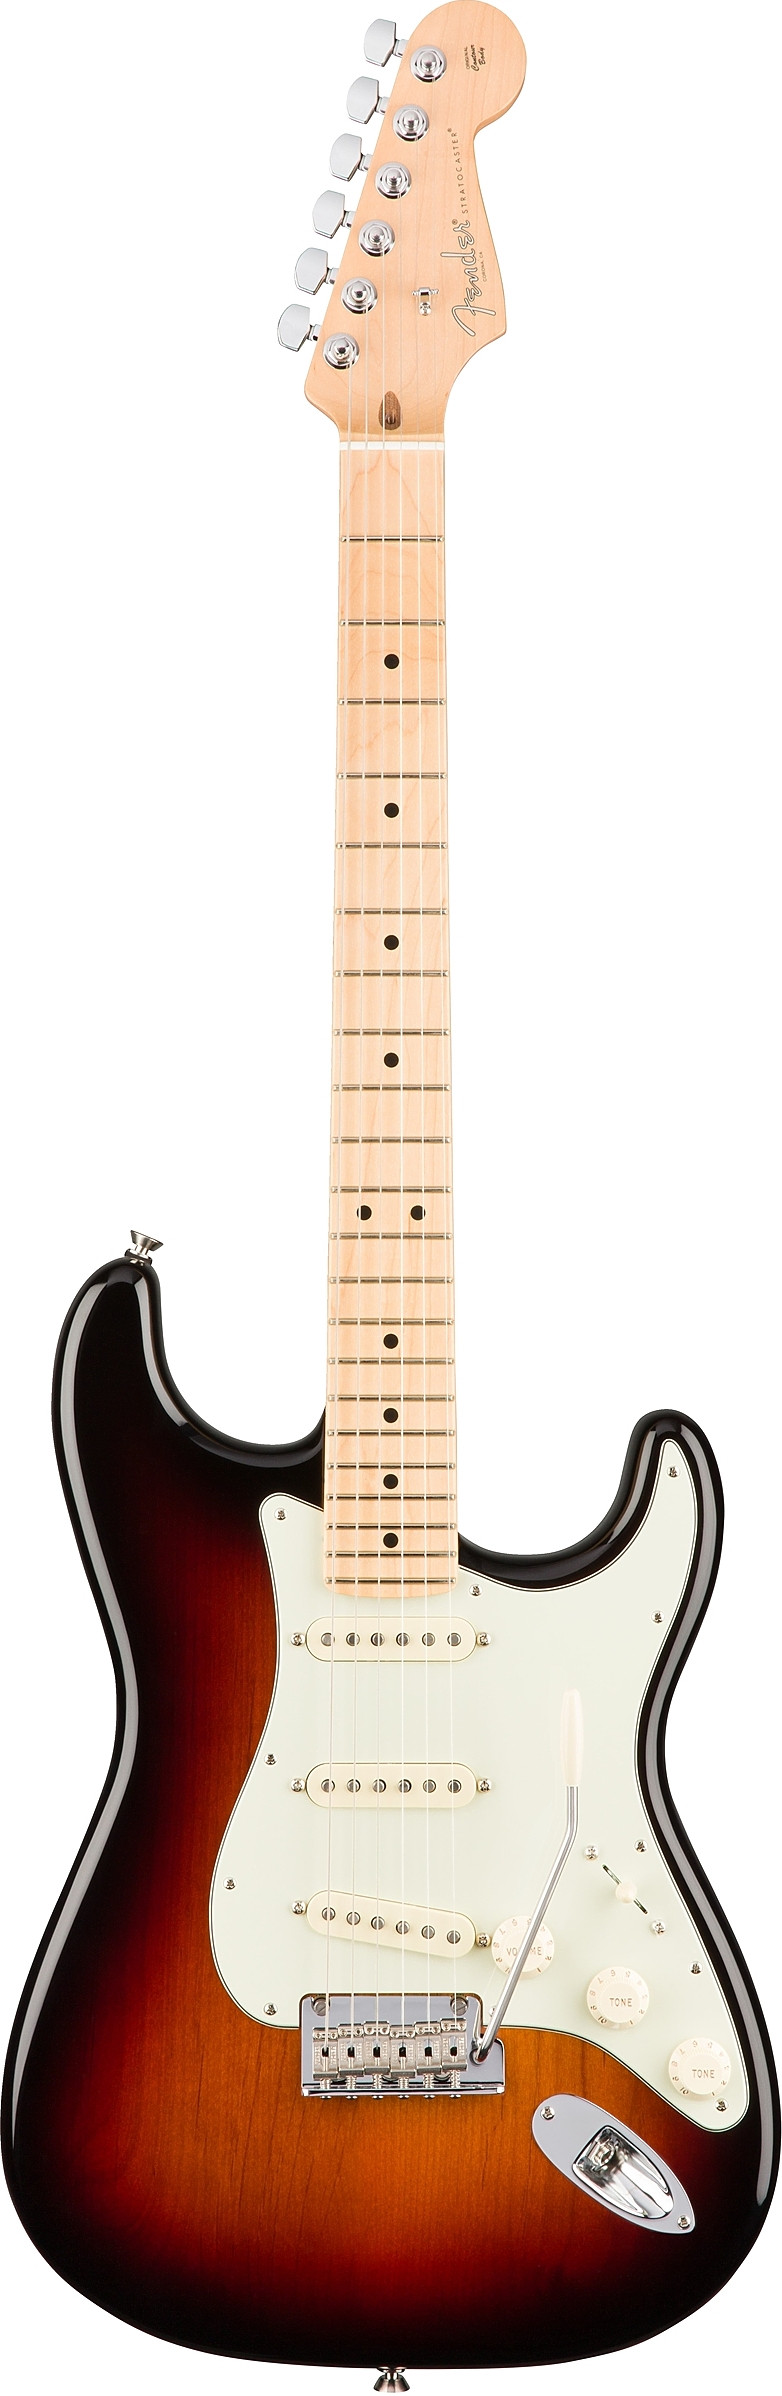 American Professional Stratocaster by Fender